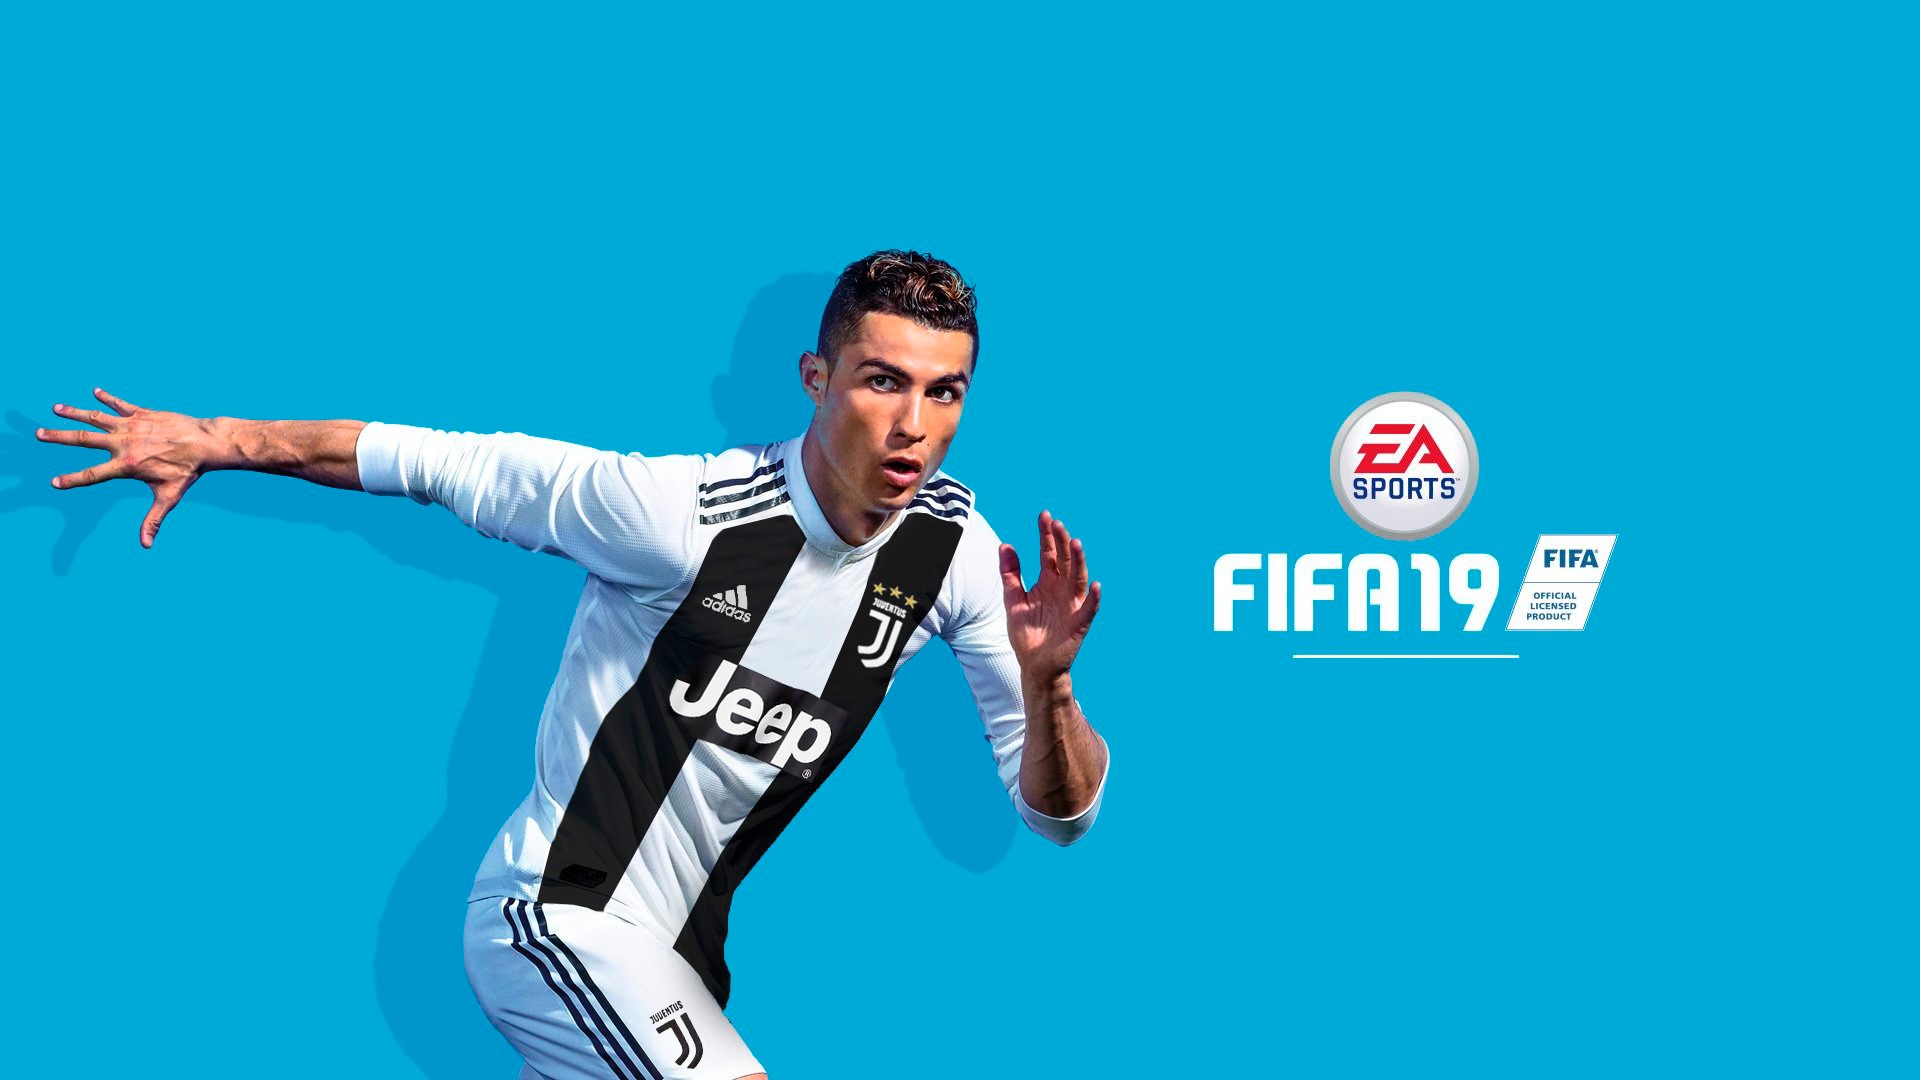 FIFA misses out on Juventus license as PES grabs exclusive deal